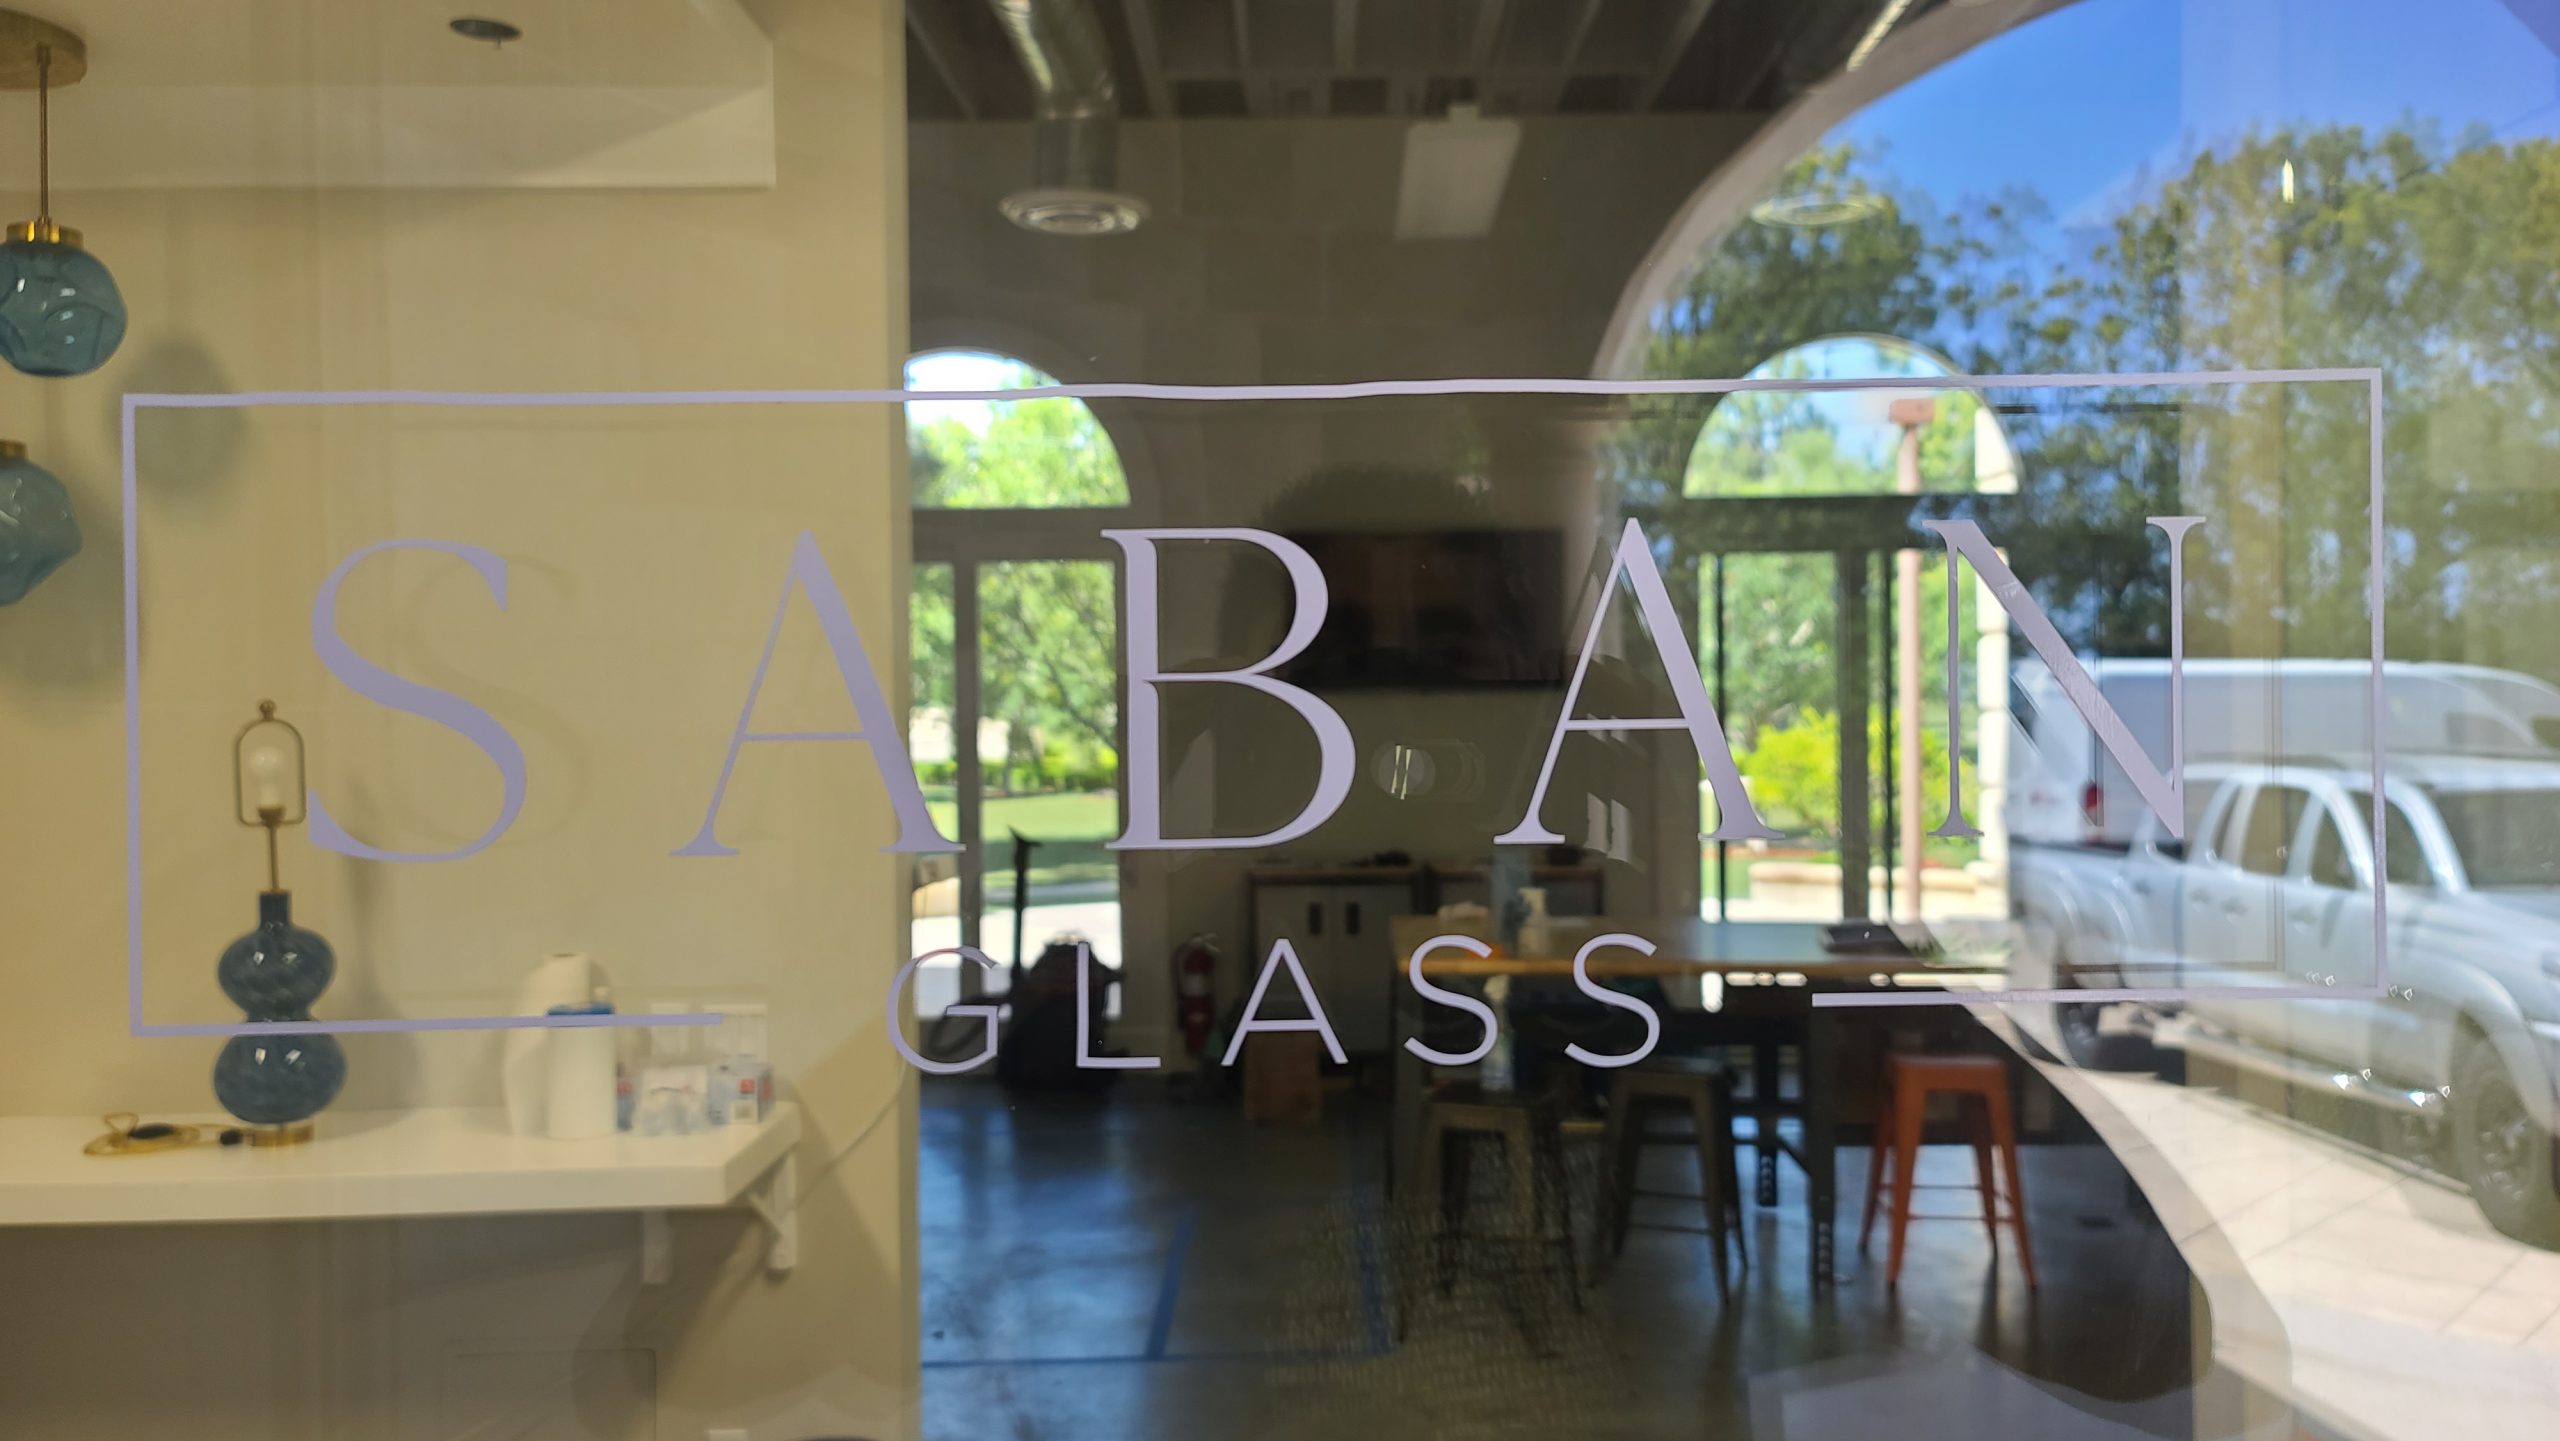 You are currently viewing Storefront Window Graphics for Saban Glassware in Los Angeles